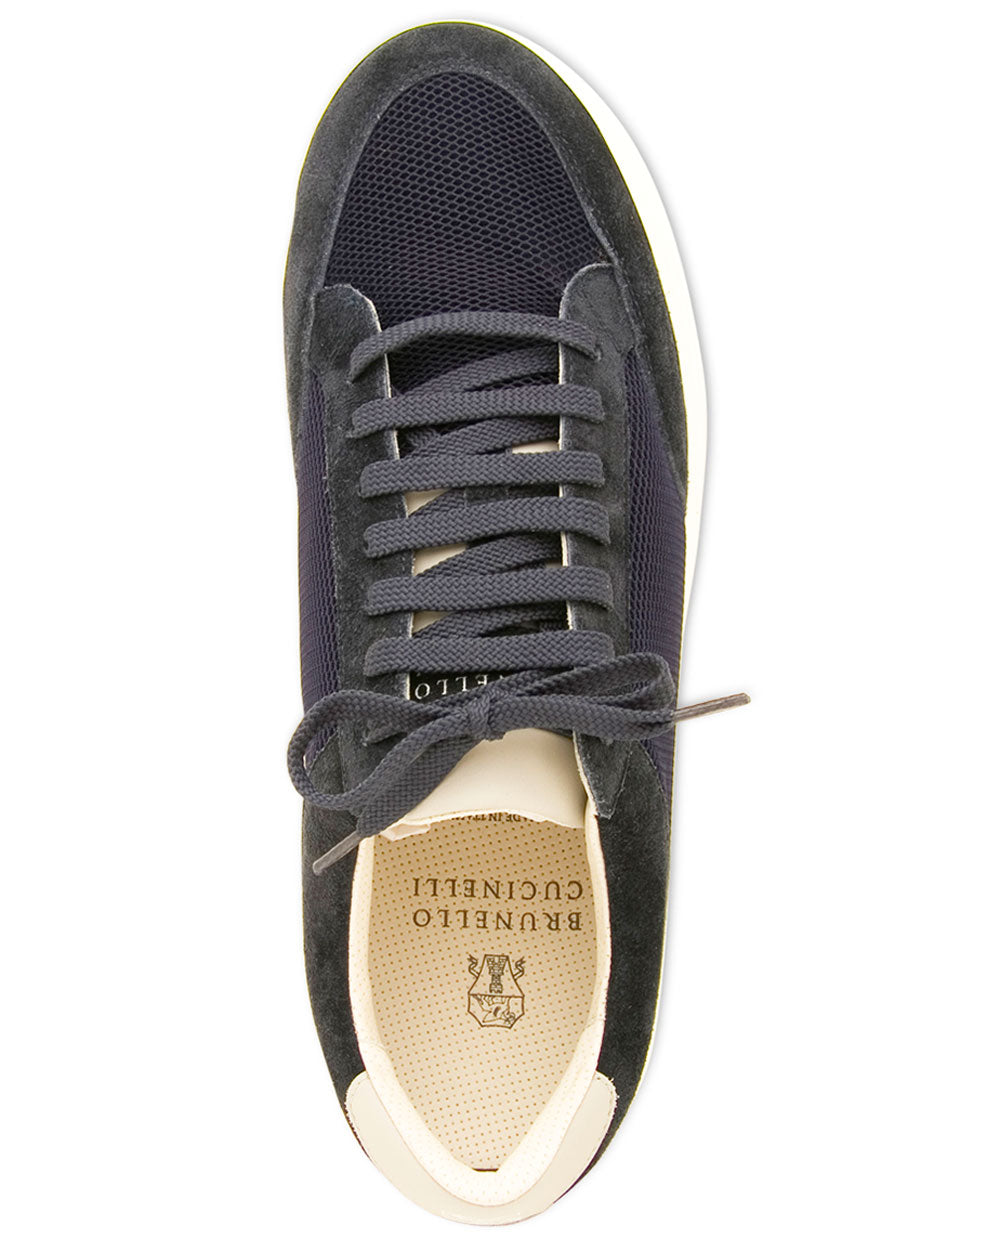 Knit and Suede Sneaker in Navy